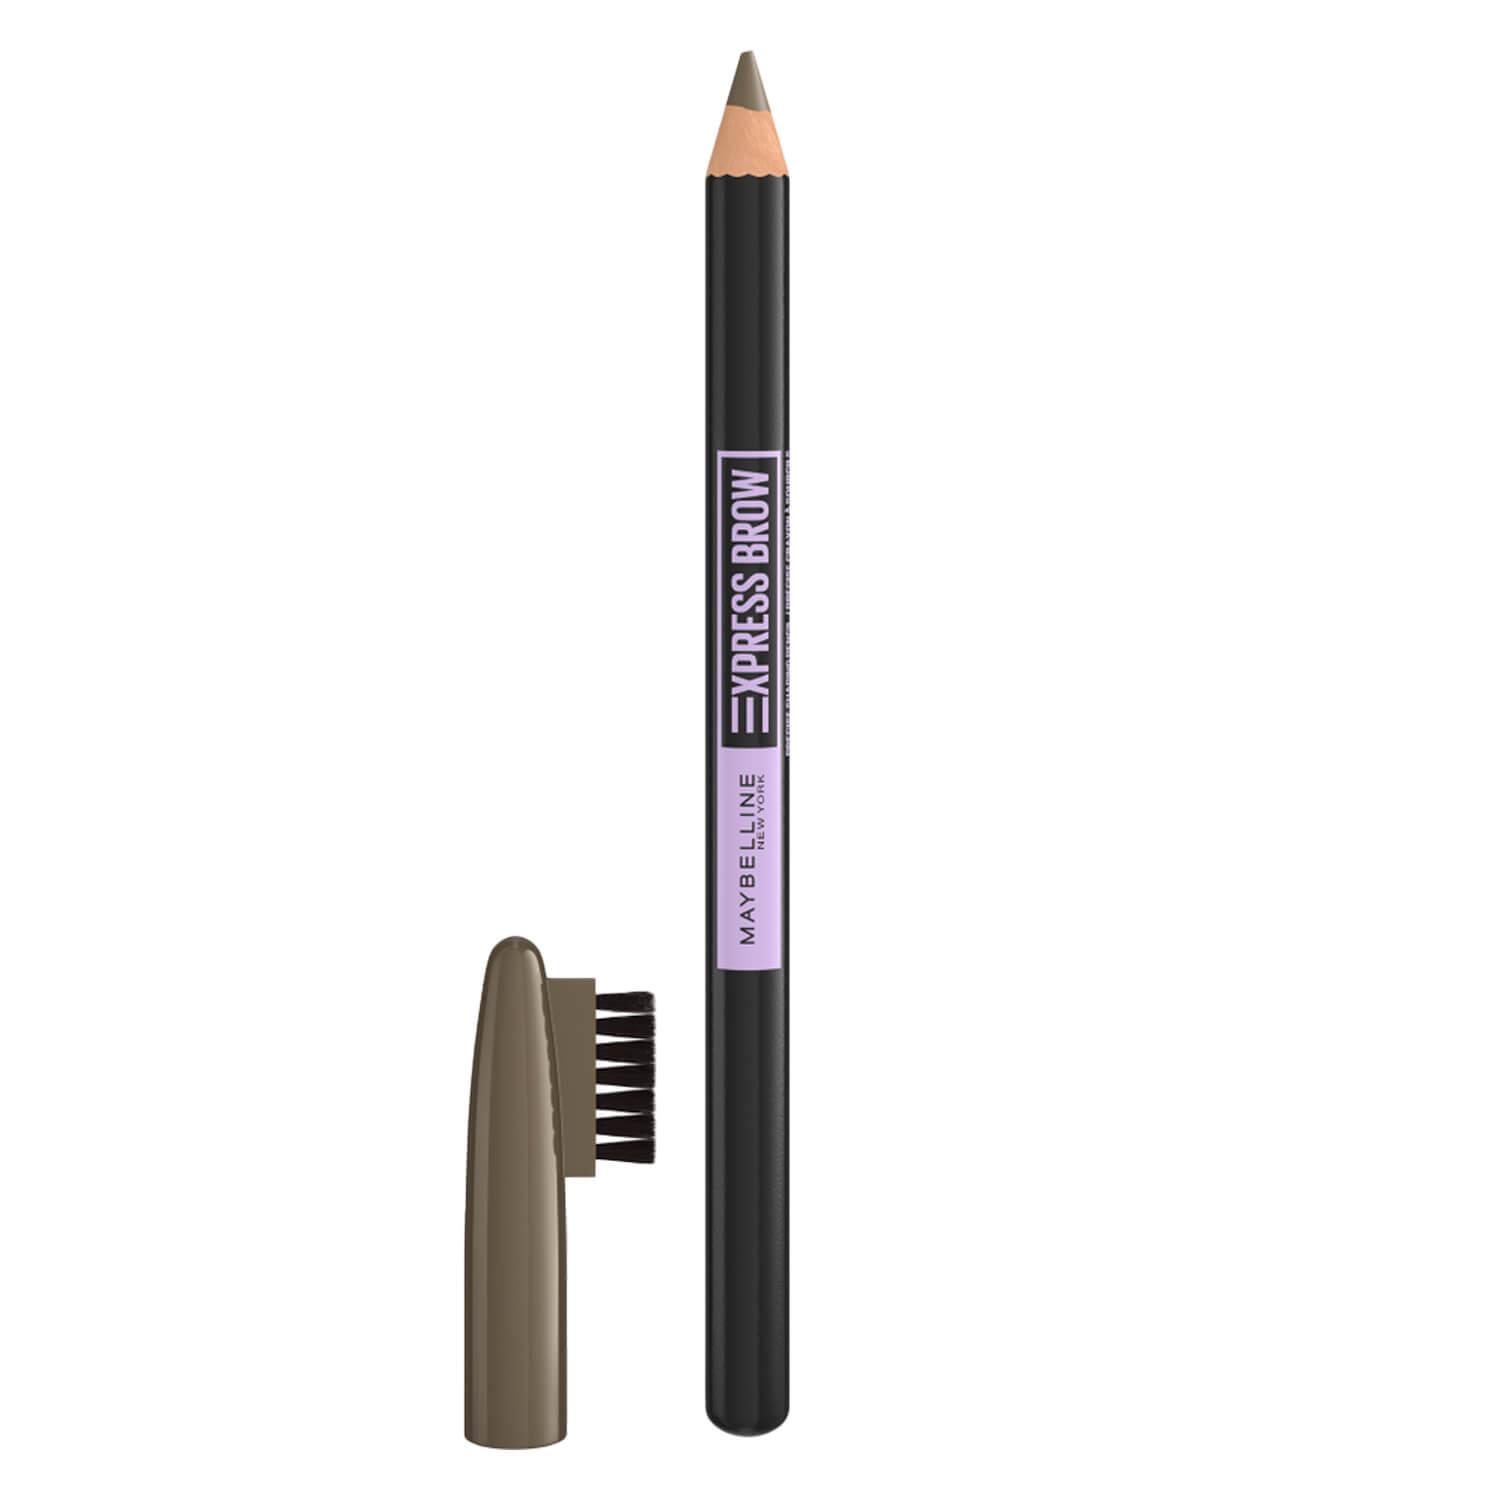 Maybelline NY Brows - Express Brow Precise Shaping 04 Medium Brown